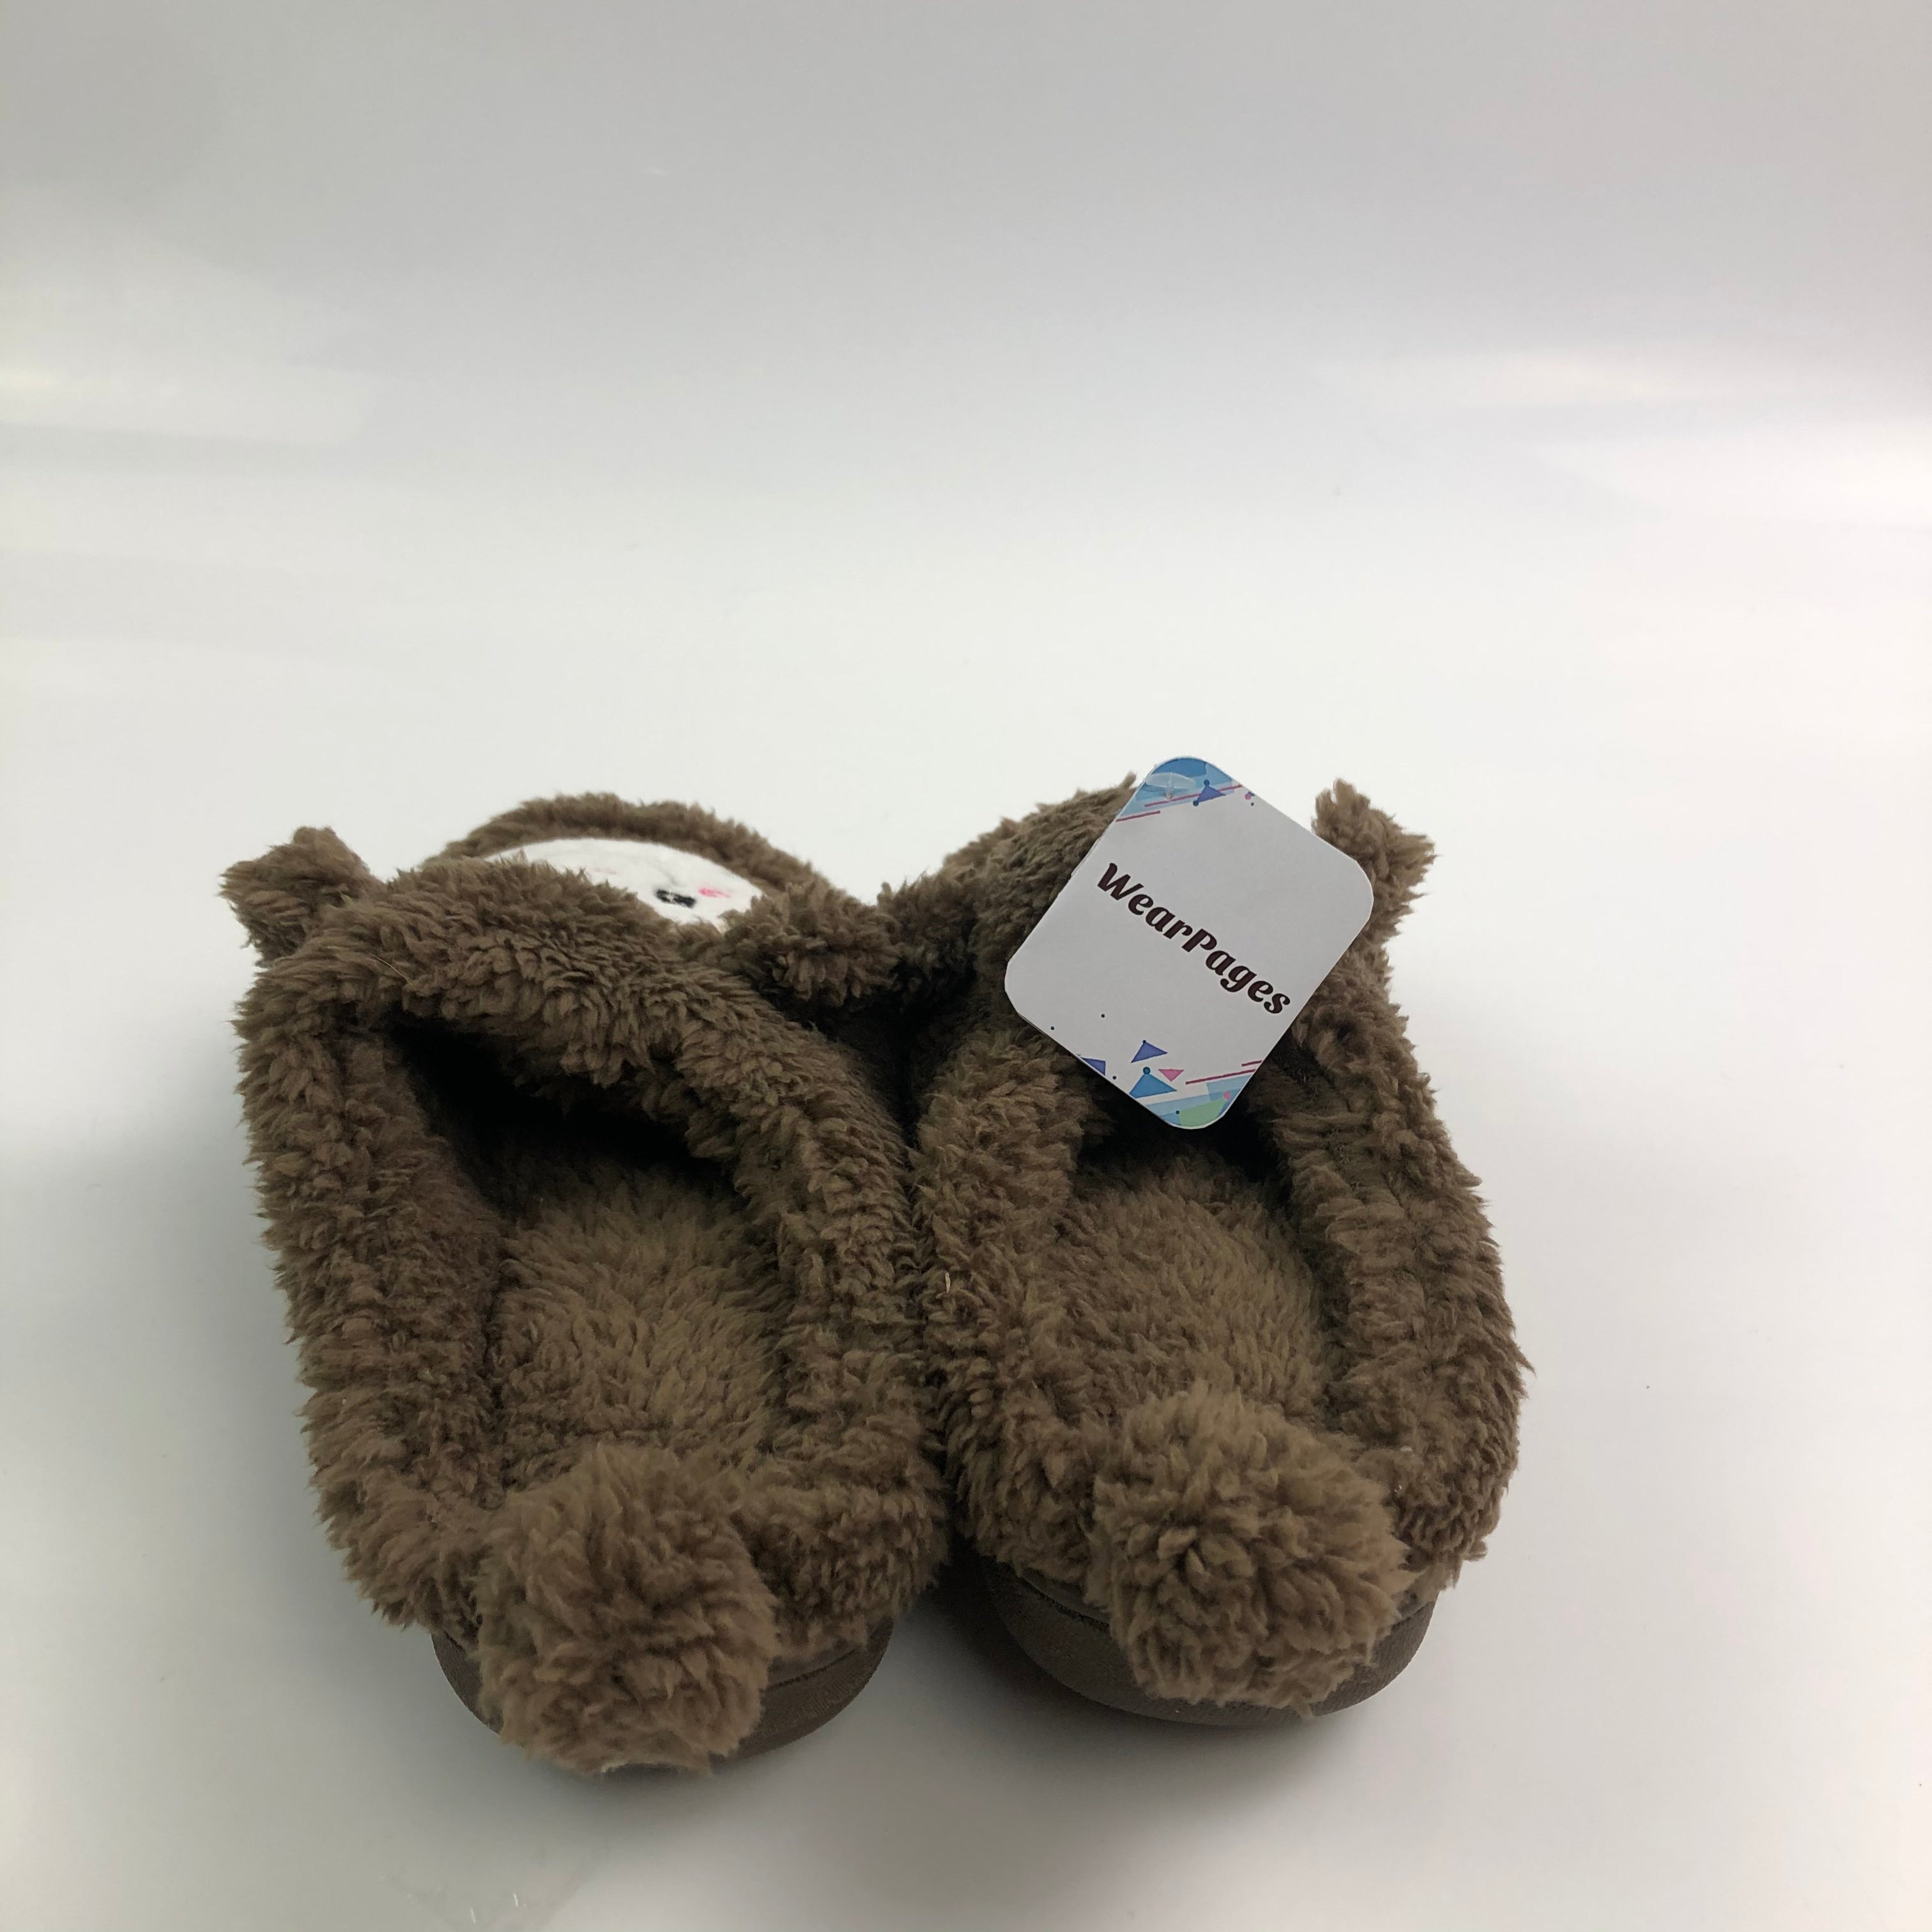 WearPages  Funny Fluffy Monkey Slippers - Glow Guards